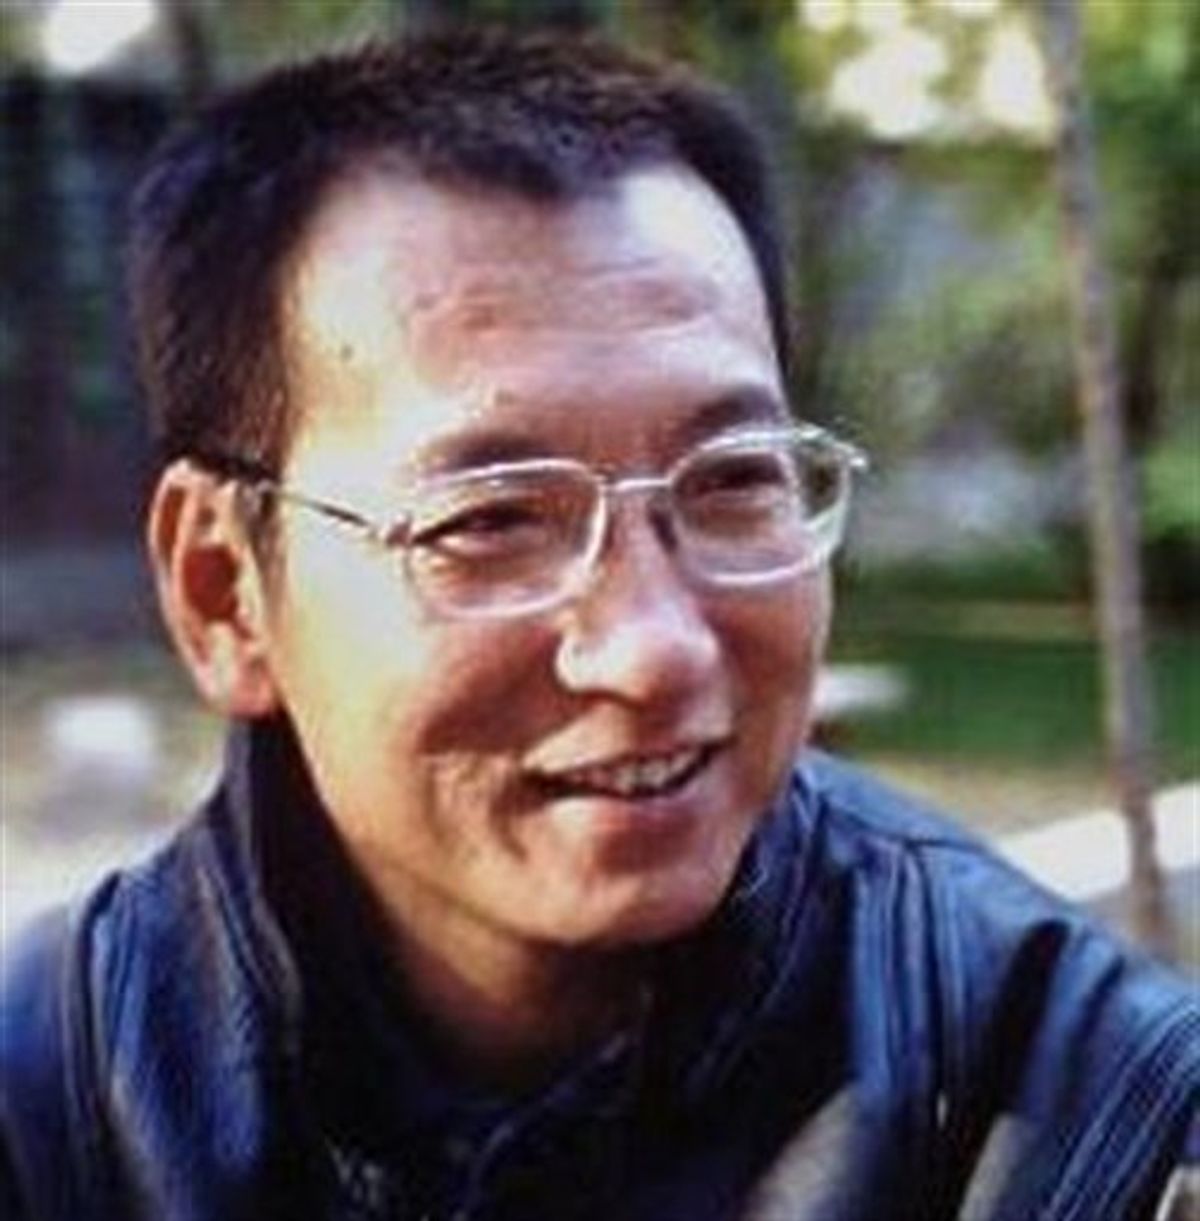 This undated image provided by Voice of America shows Chinese dissident Liu Xiaobo who won the 2010 Nobel Peace Prize Friday Oct. 8, 2010. (AP Photo/voanews.com) (AP)